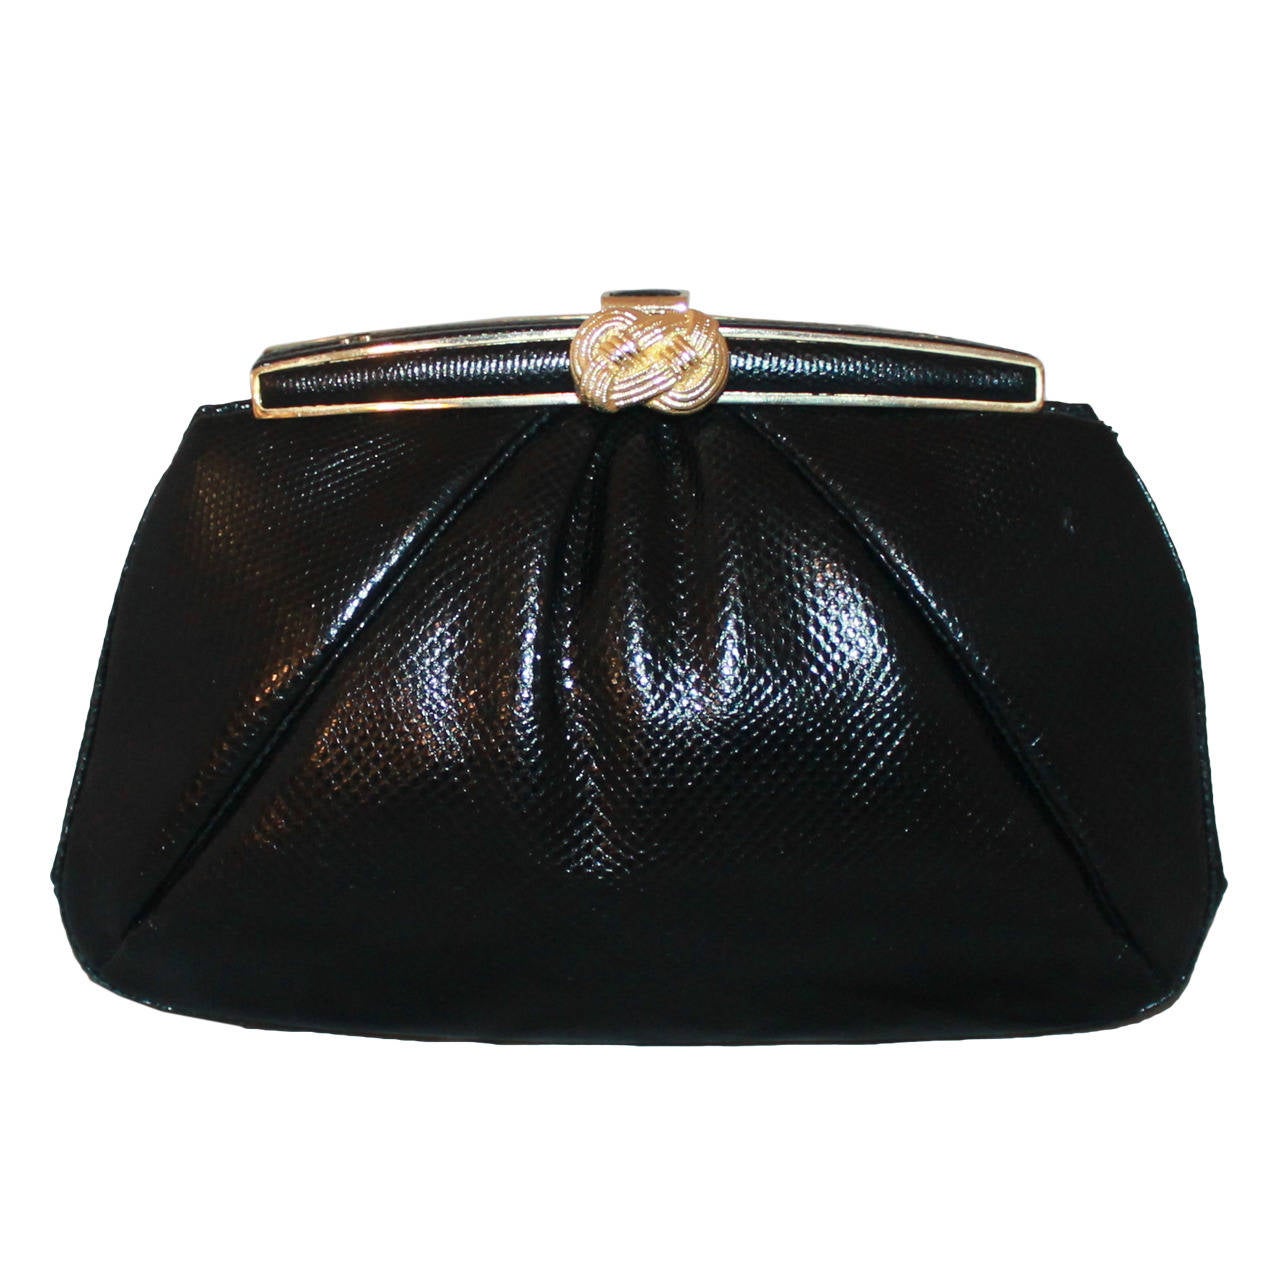 Judith Leiber 1980's Vintage Black Lizard Evening Bag with Gold Knot Clasp